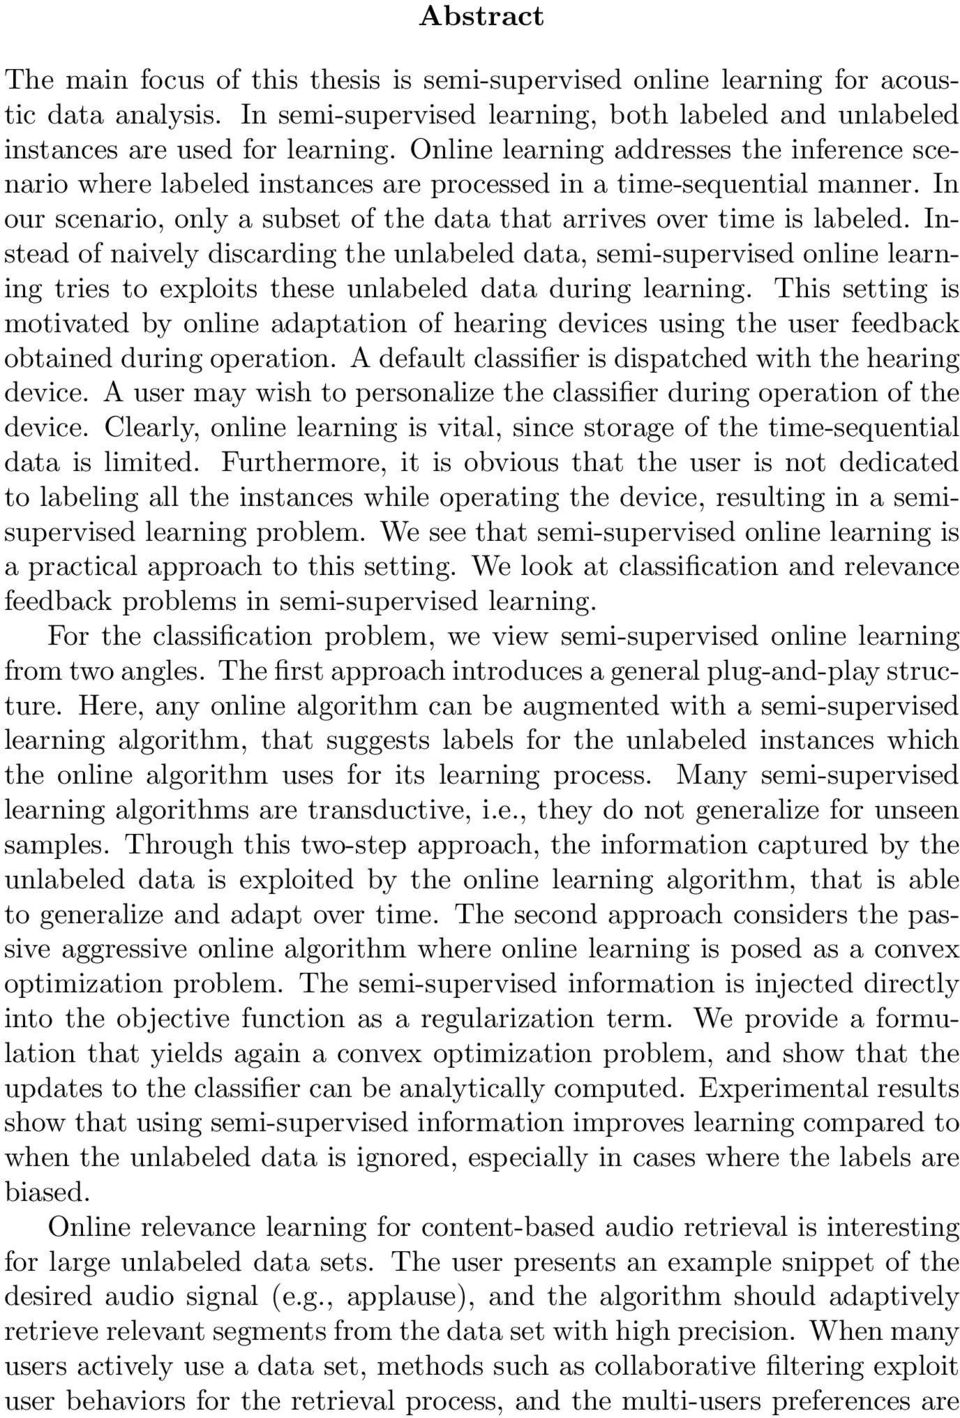 Instead of naively discarding the unlabeled data, semi-supervised online learning tries to exploits these unlabeled data during learning.